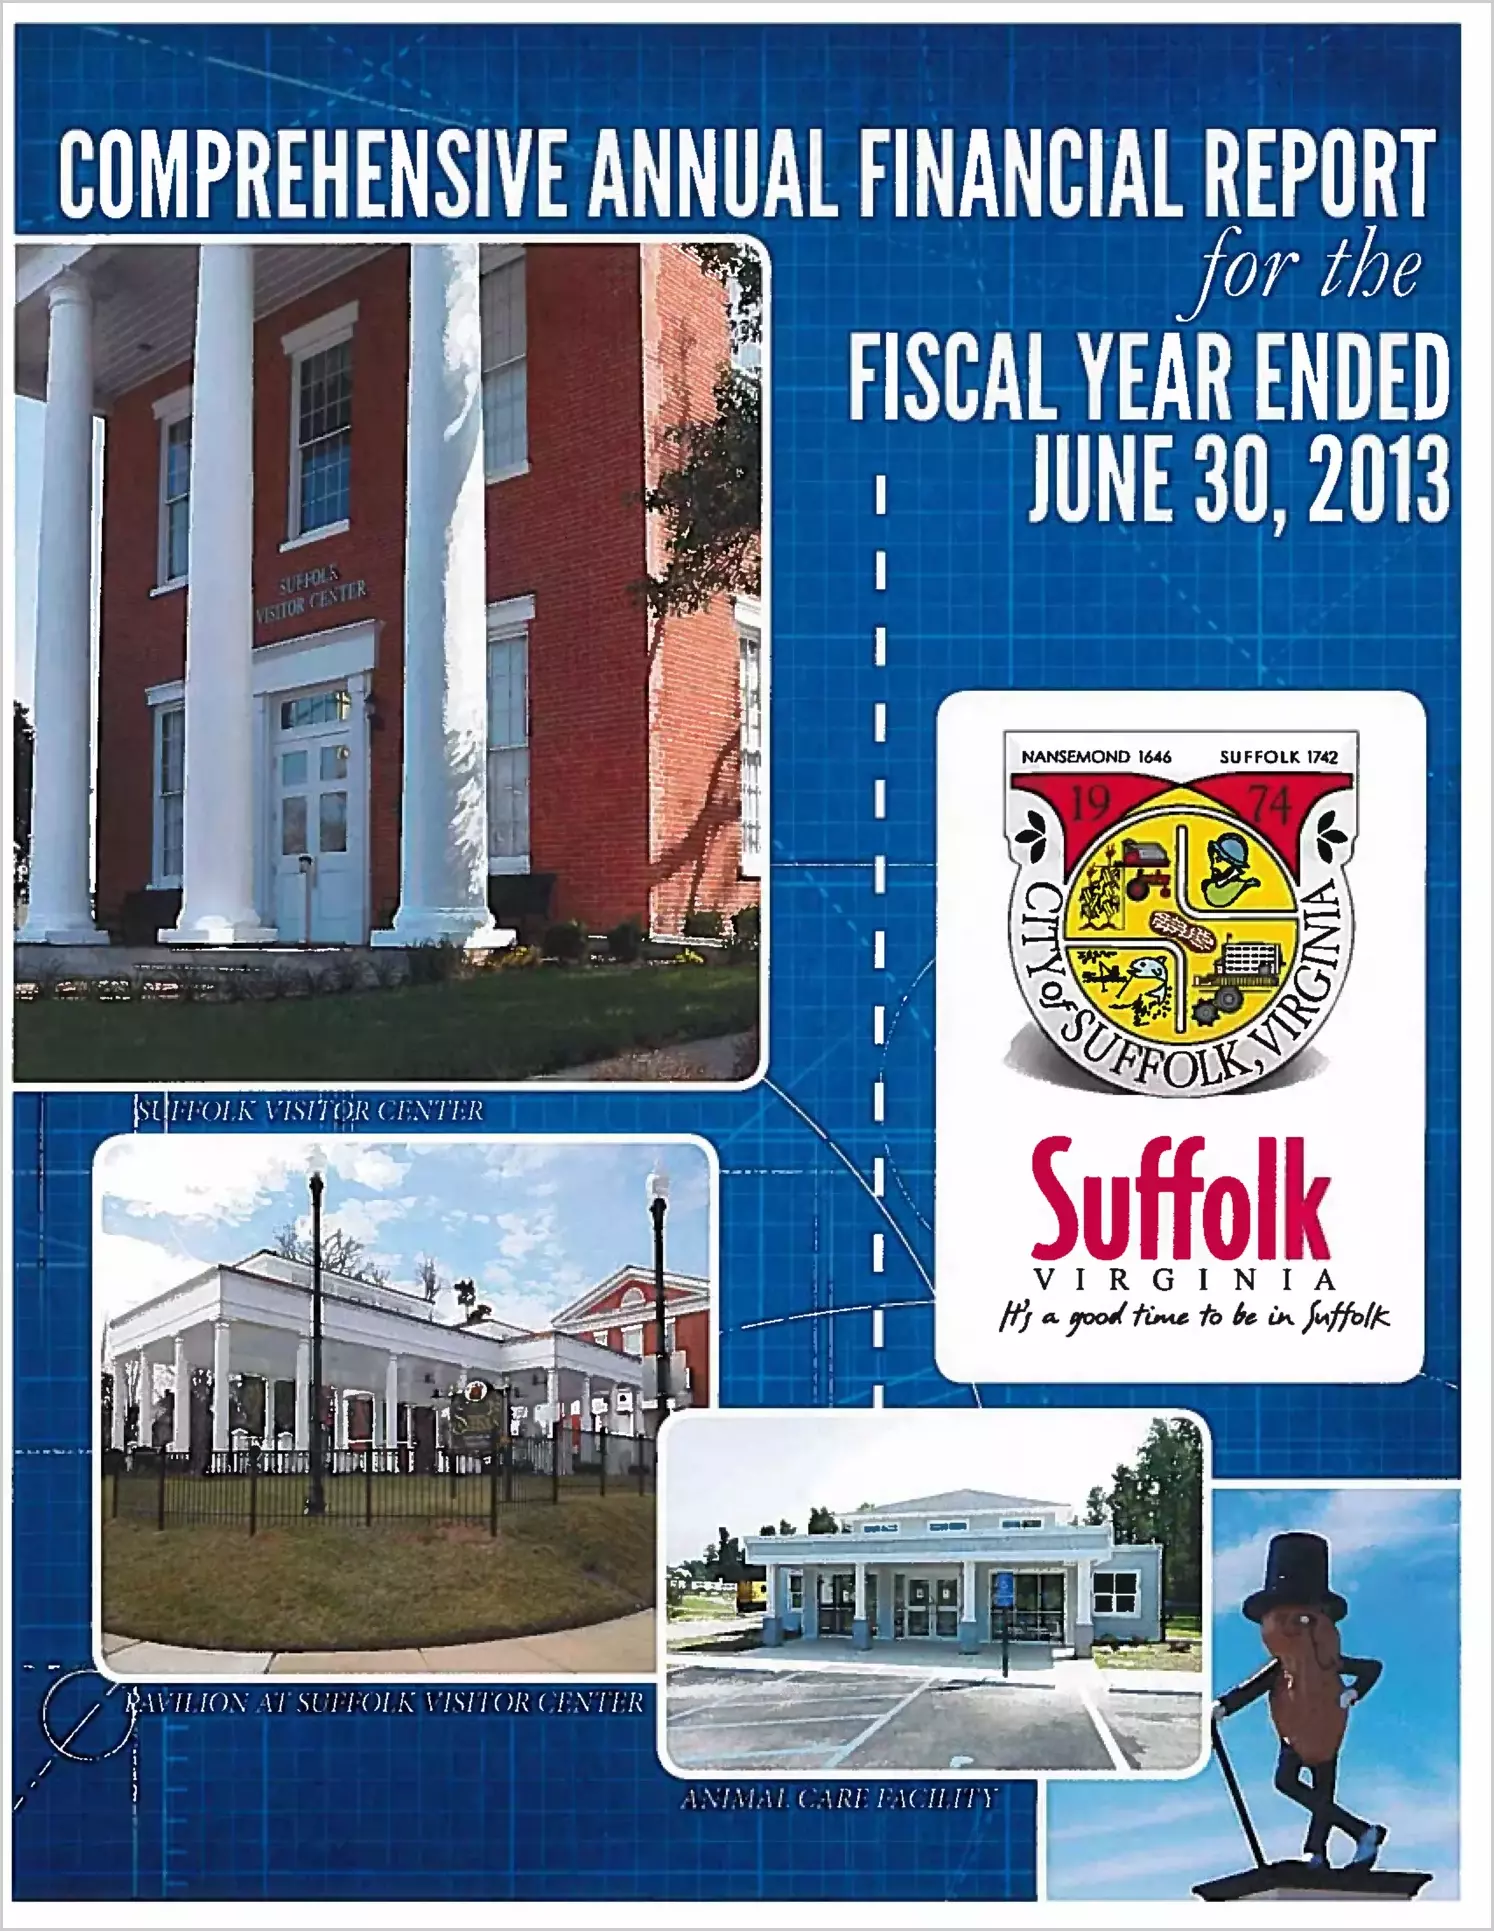 2013 Annual Financial Report for City of Suffolk